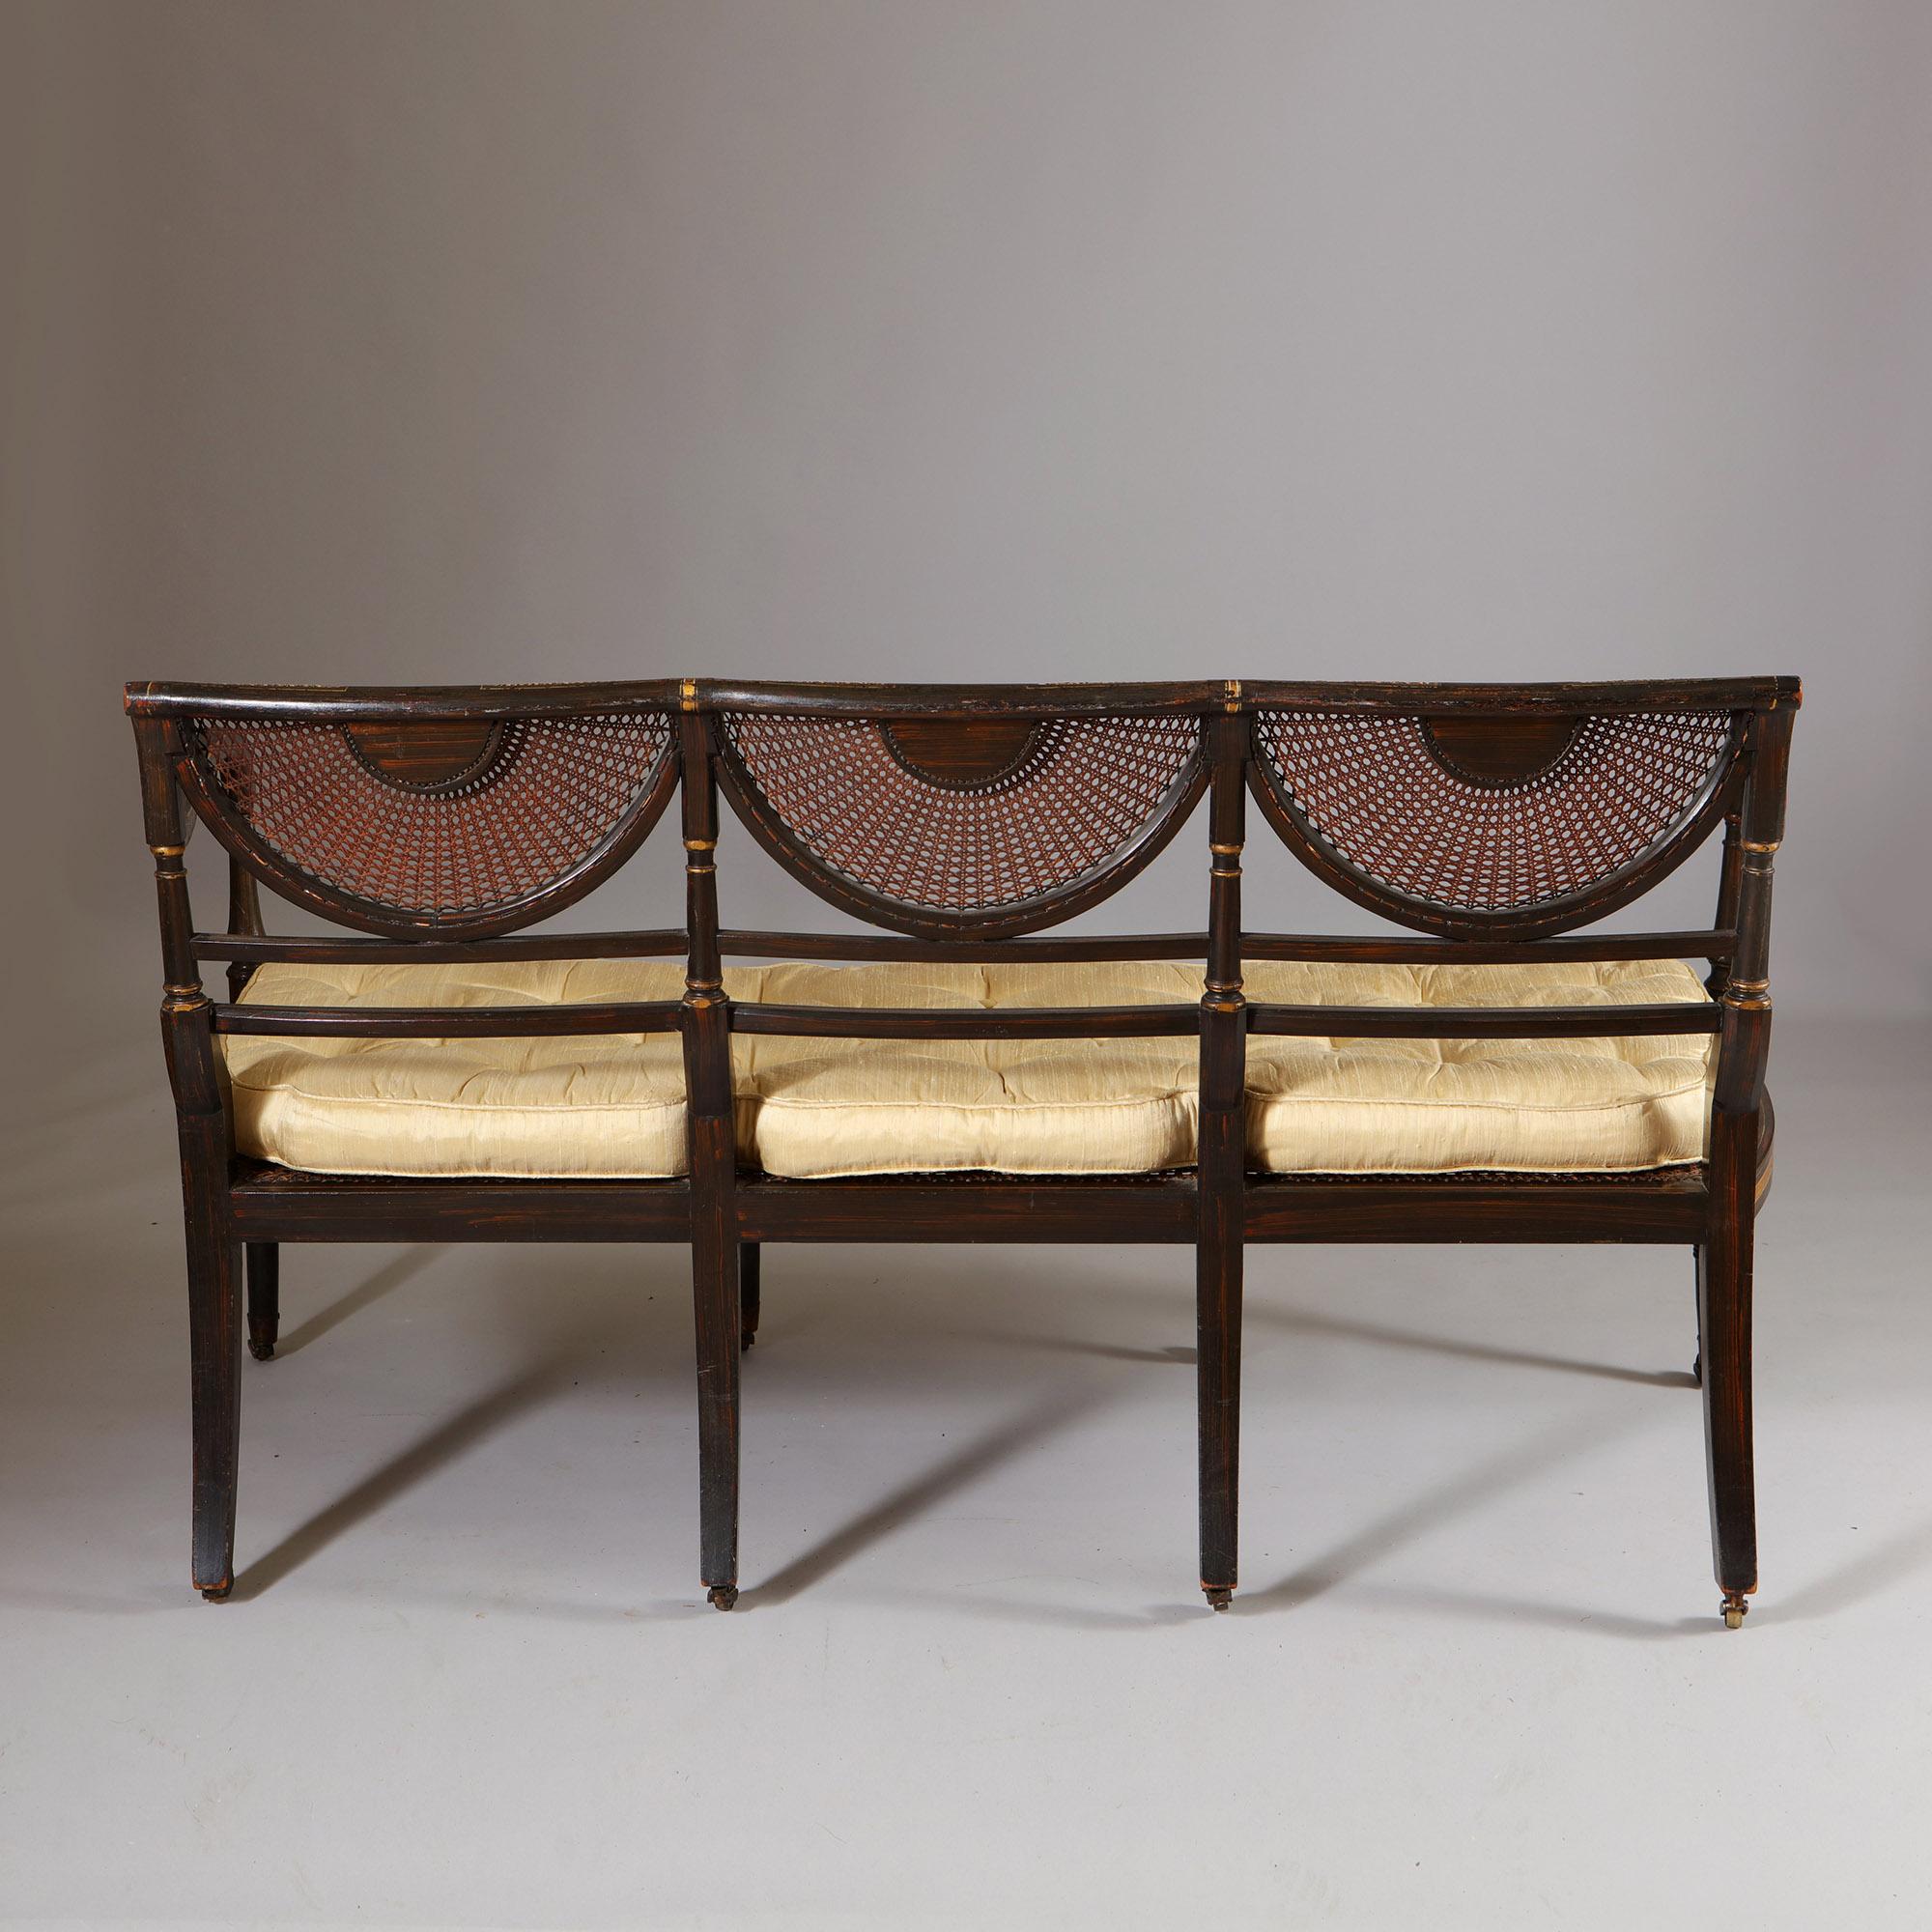 Hand-Painted A Fine Simulated Rosewood and Gilt Decorated George III Sheraton Period Settee For Sale